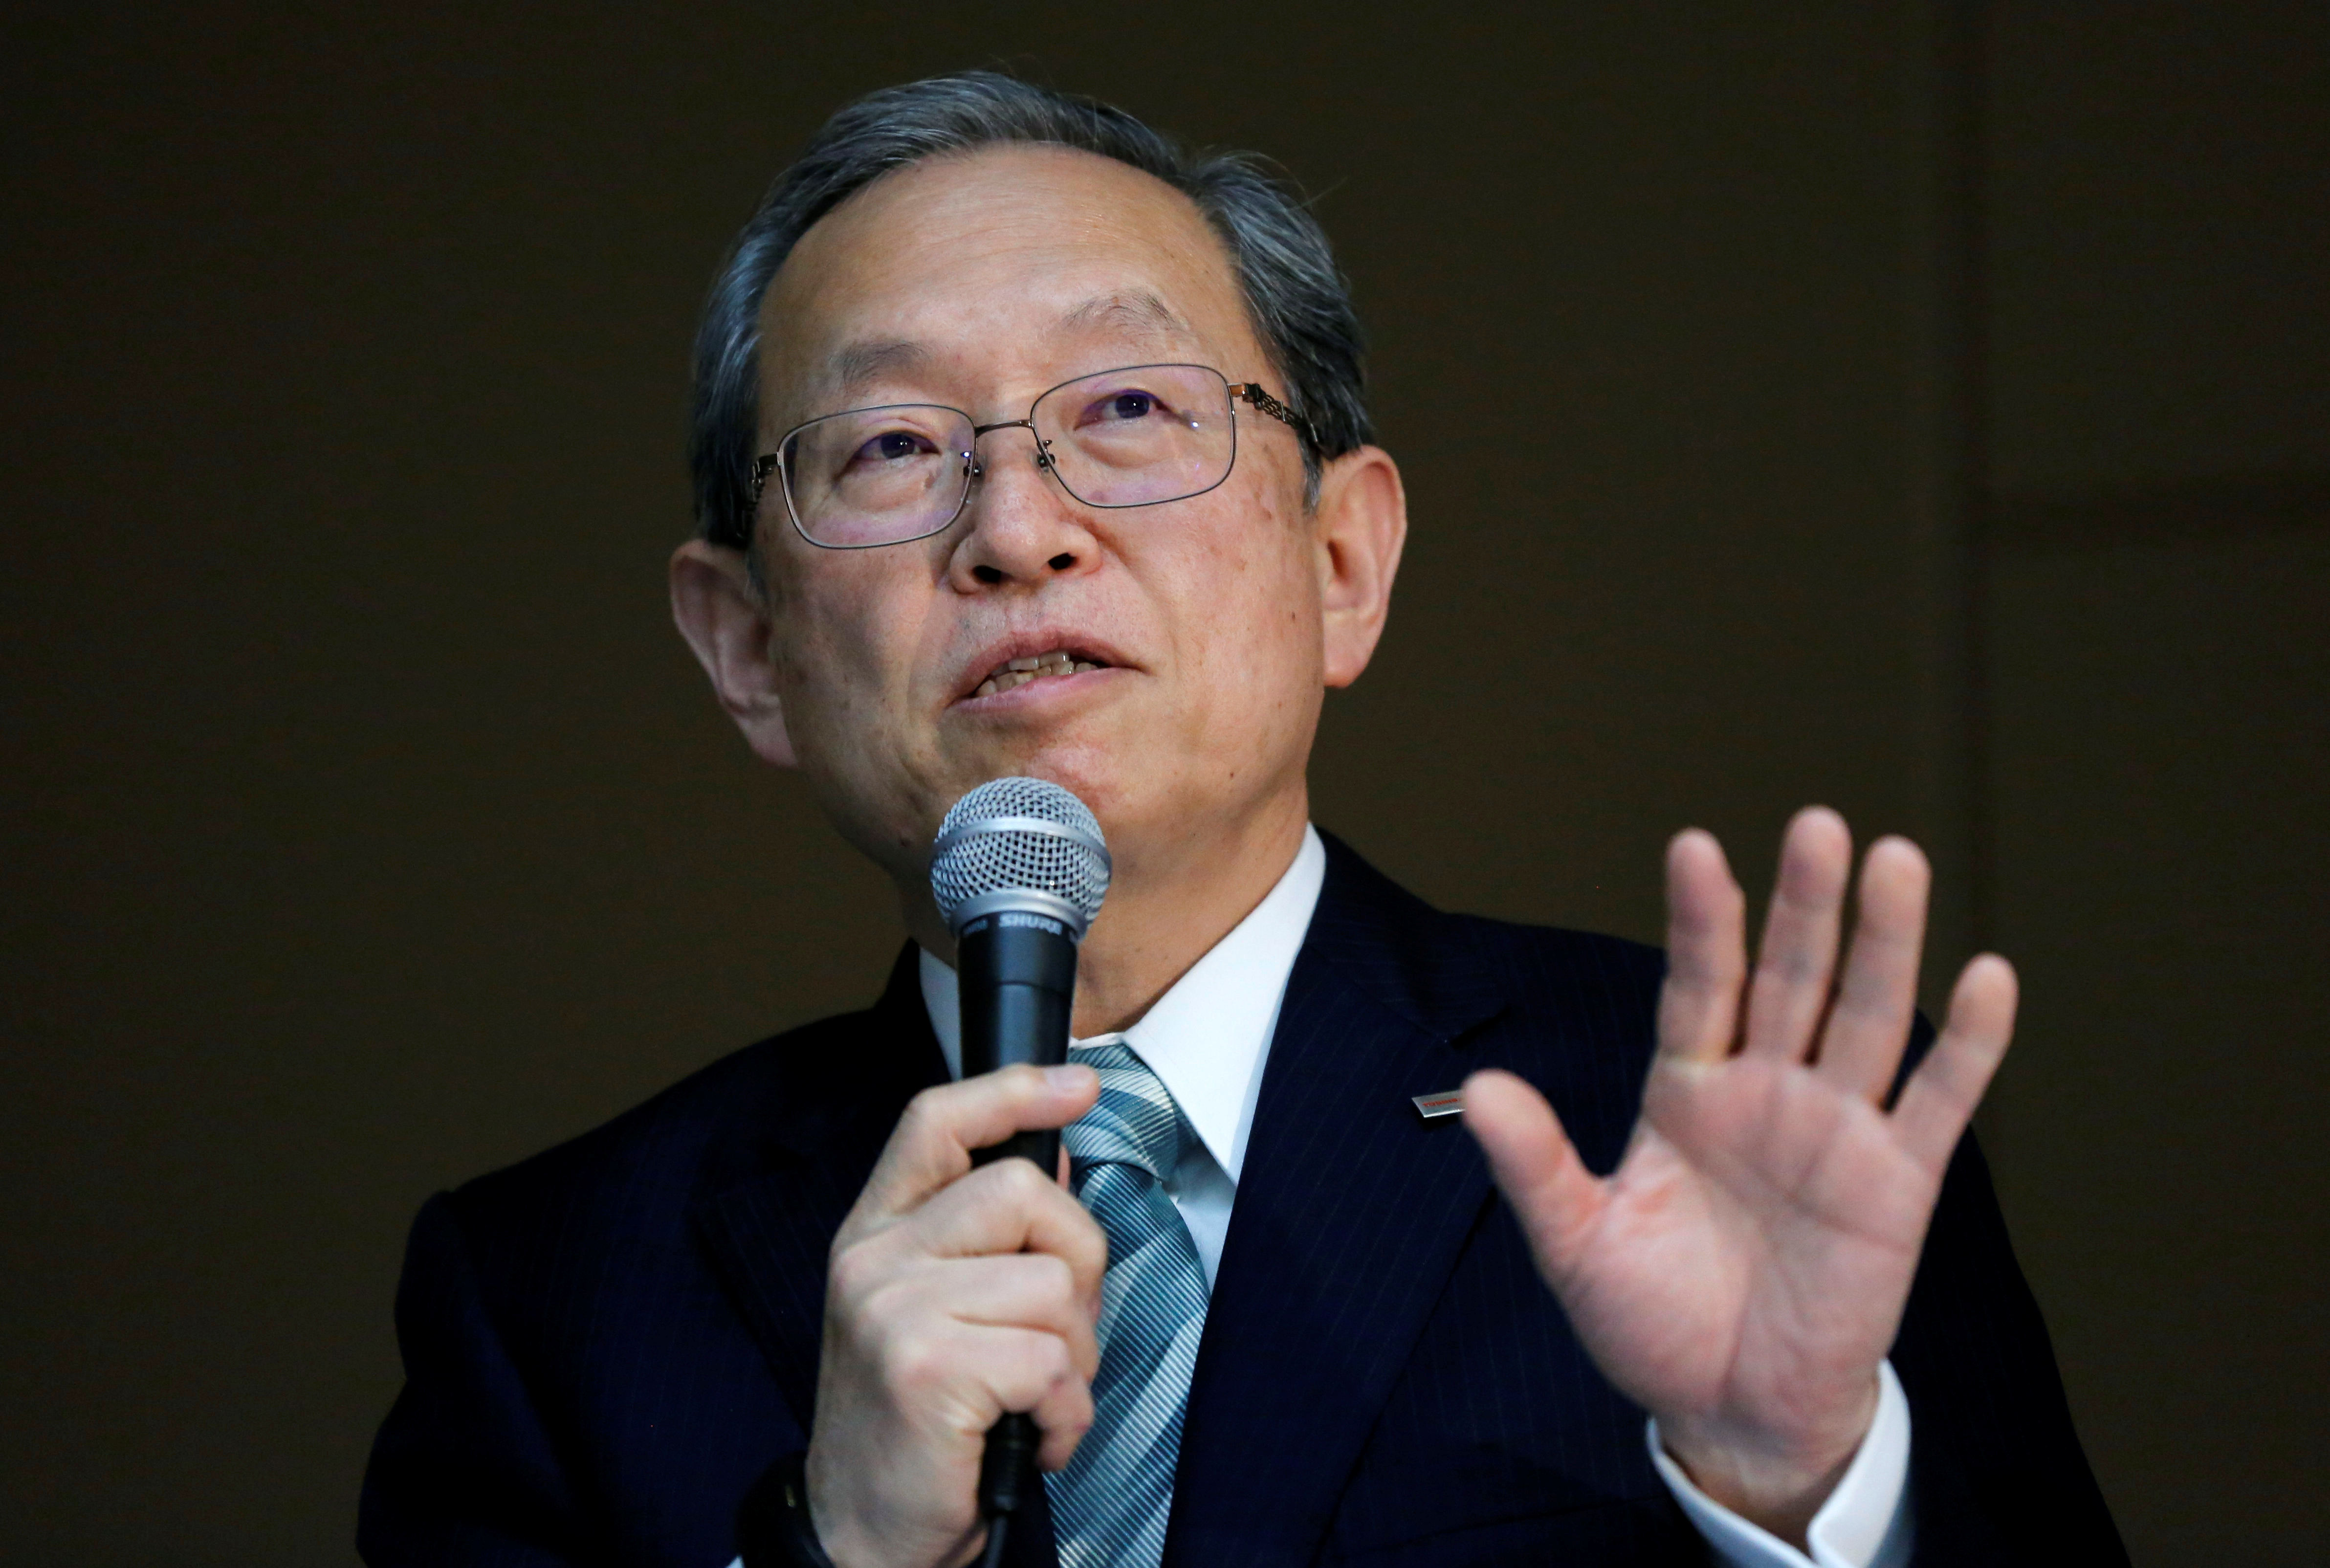 Toshiba Corp CEO Tsunakawa attends a news conference at the company's headquarters in Tokyo